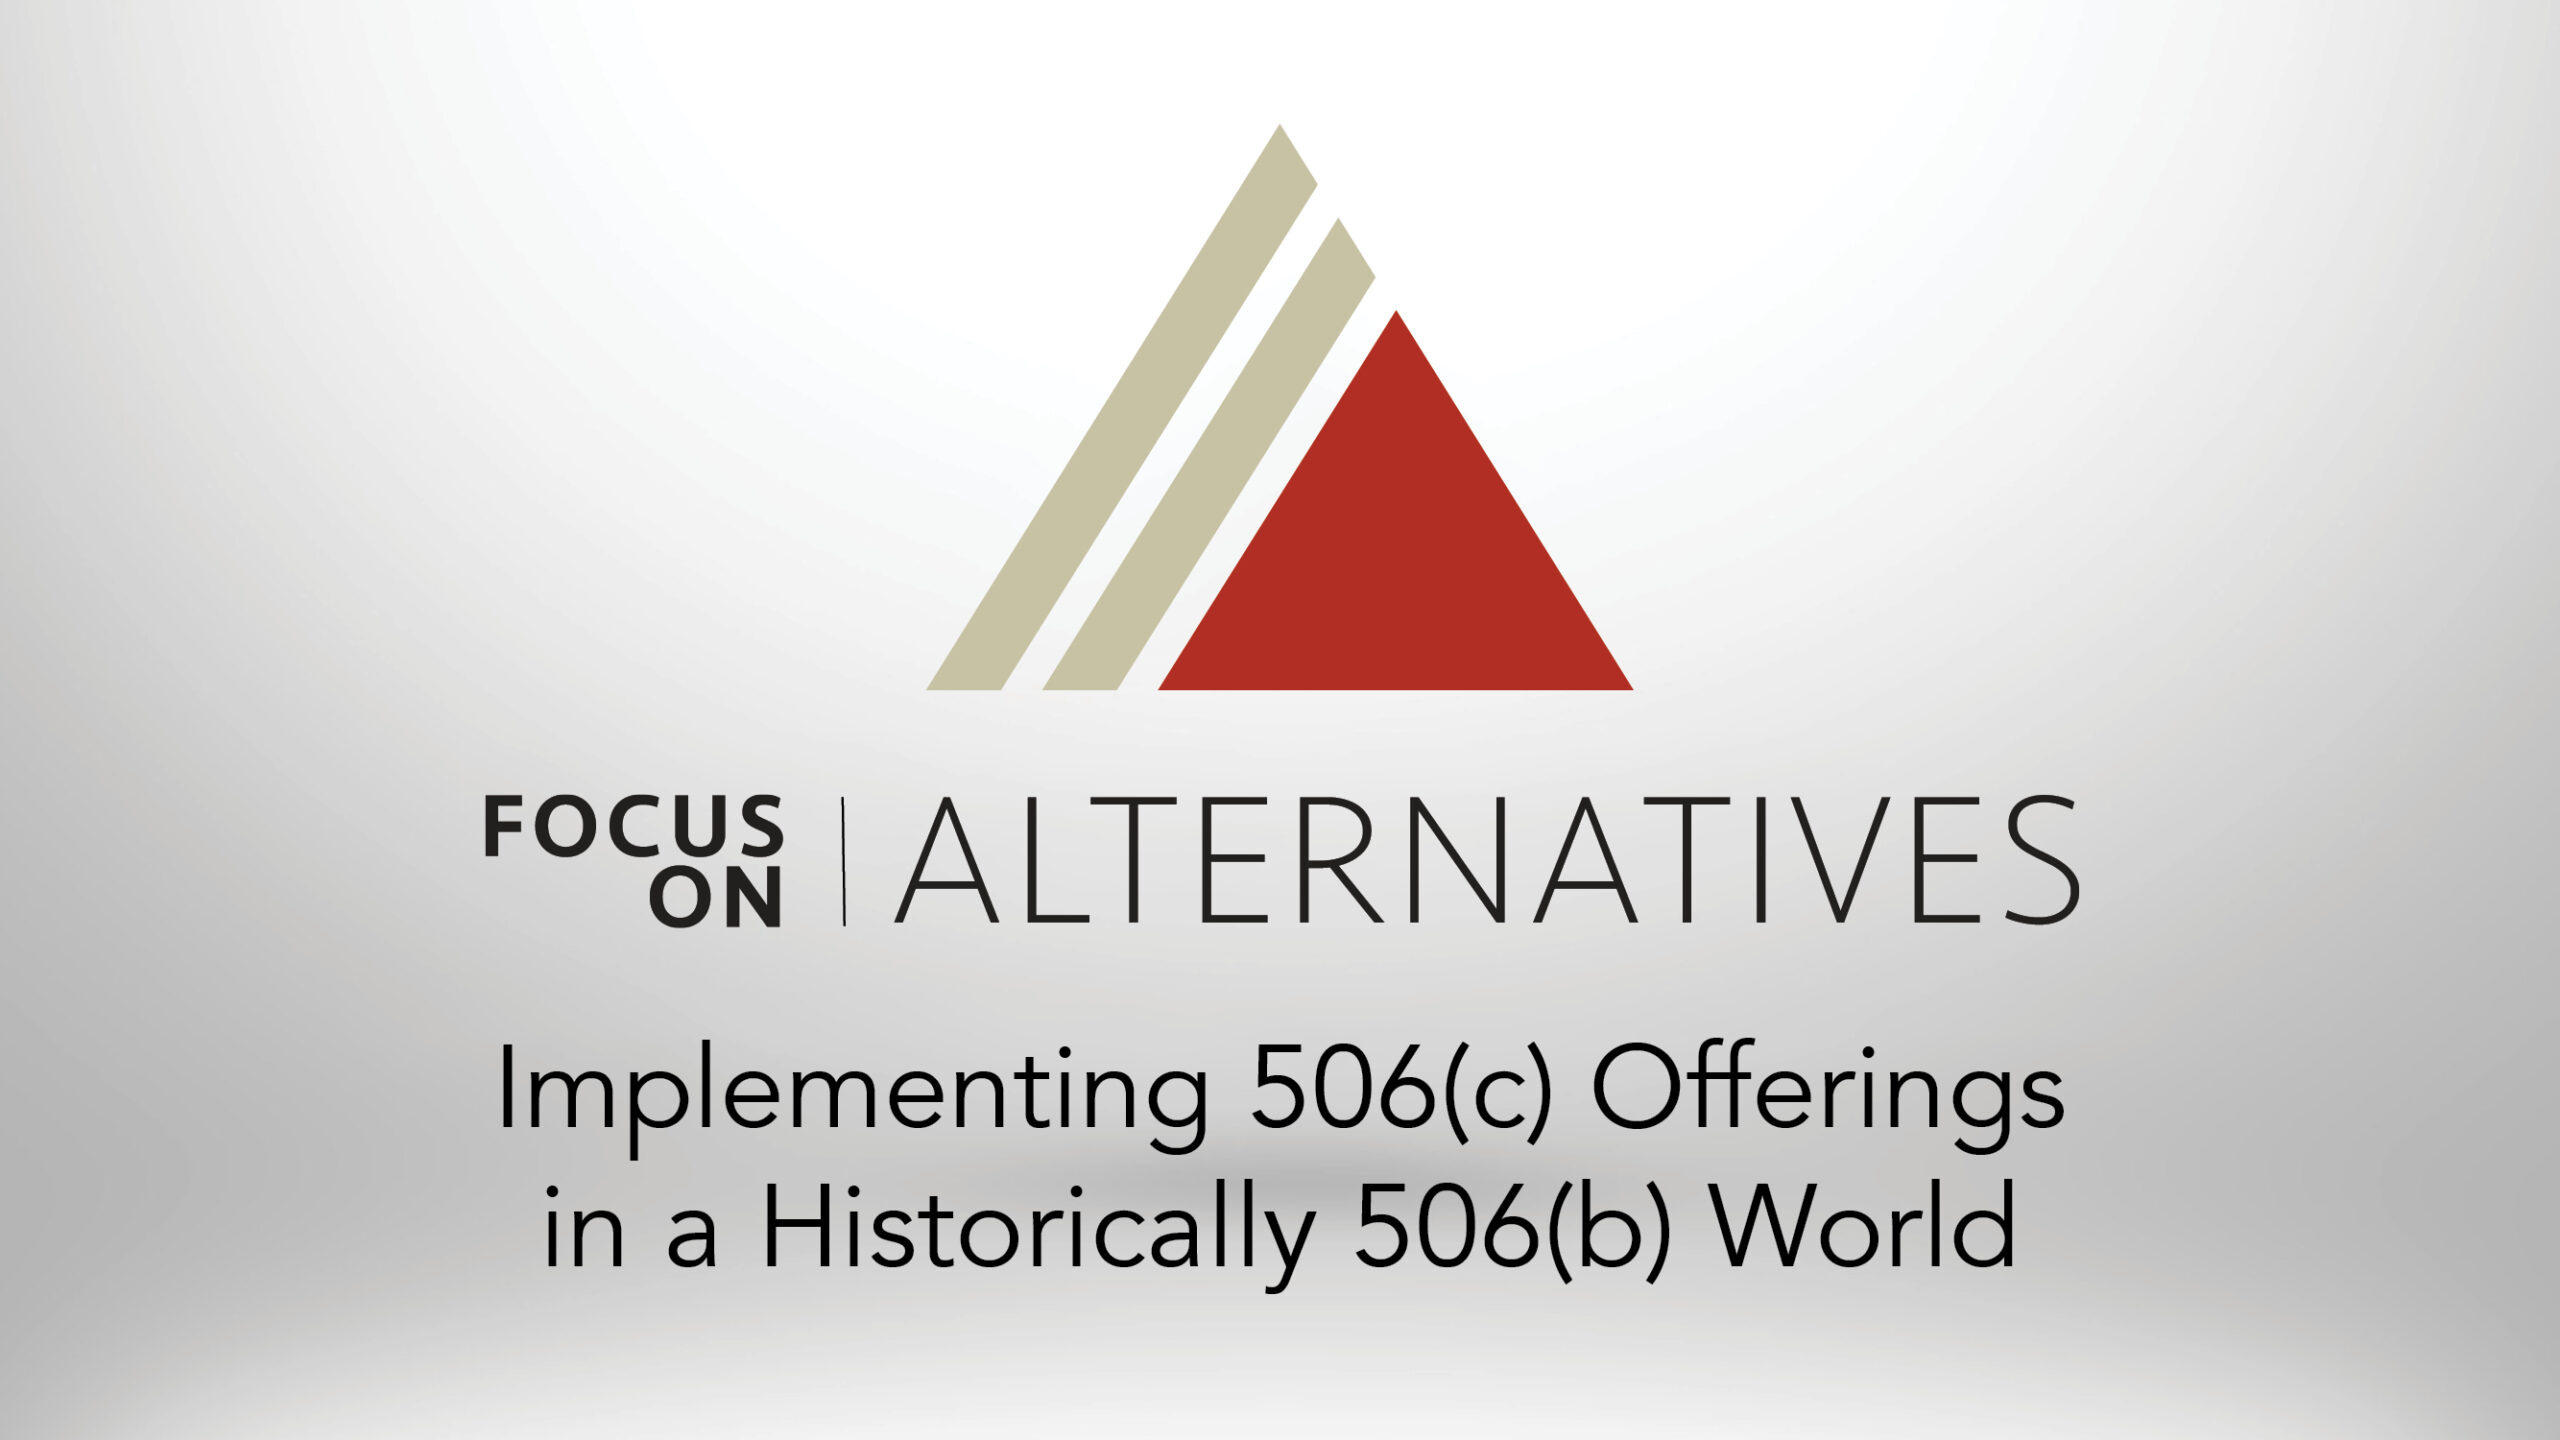 ADISA Video: Implementing 506(c) Offerings in a Historically 506(b) World